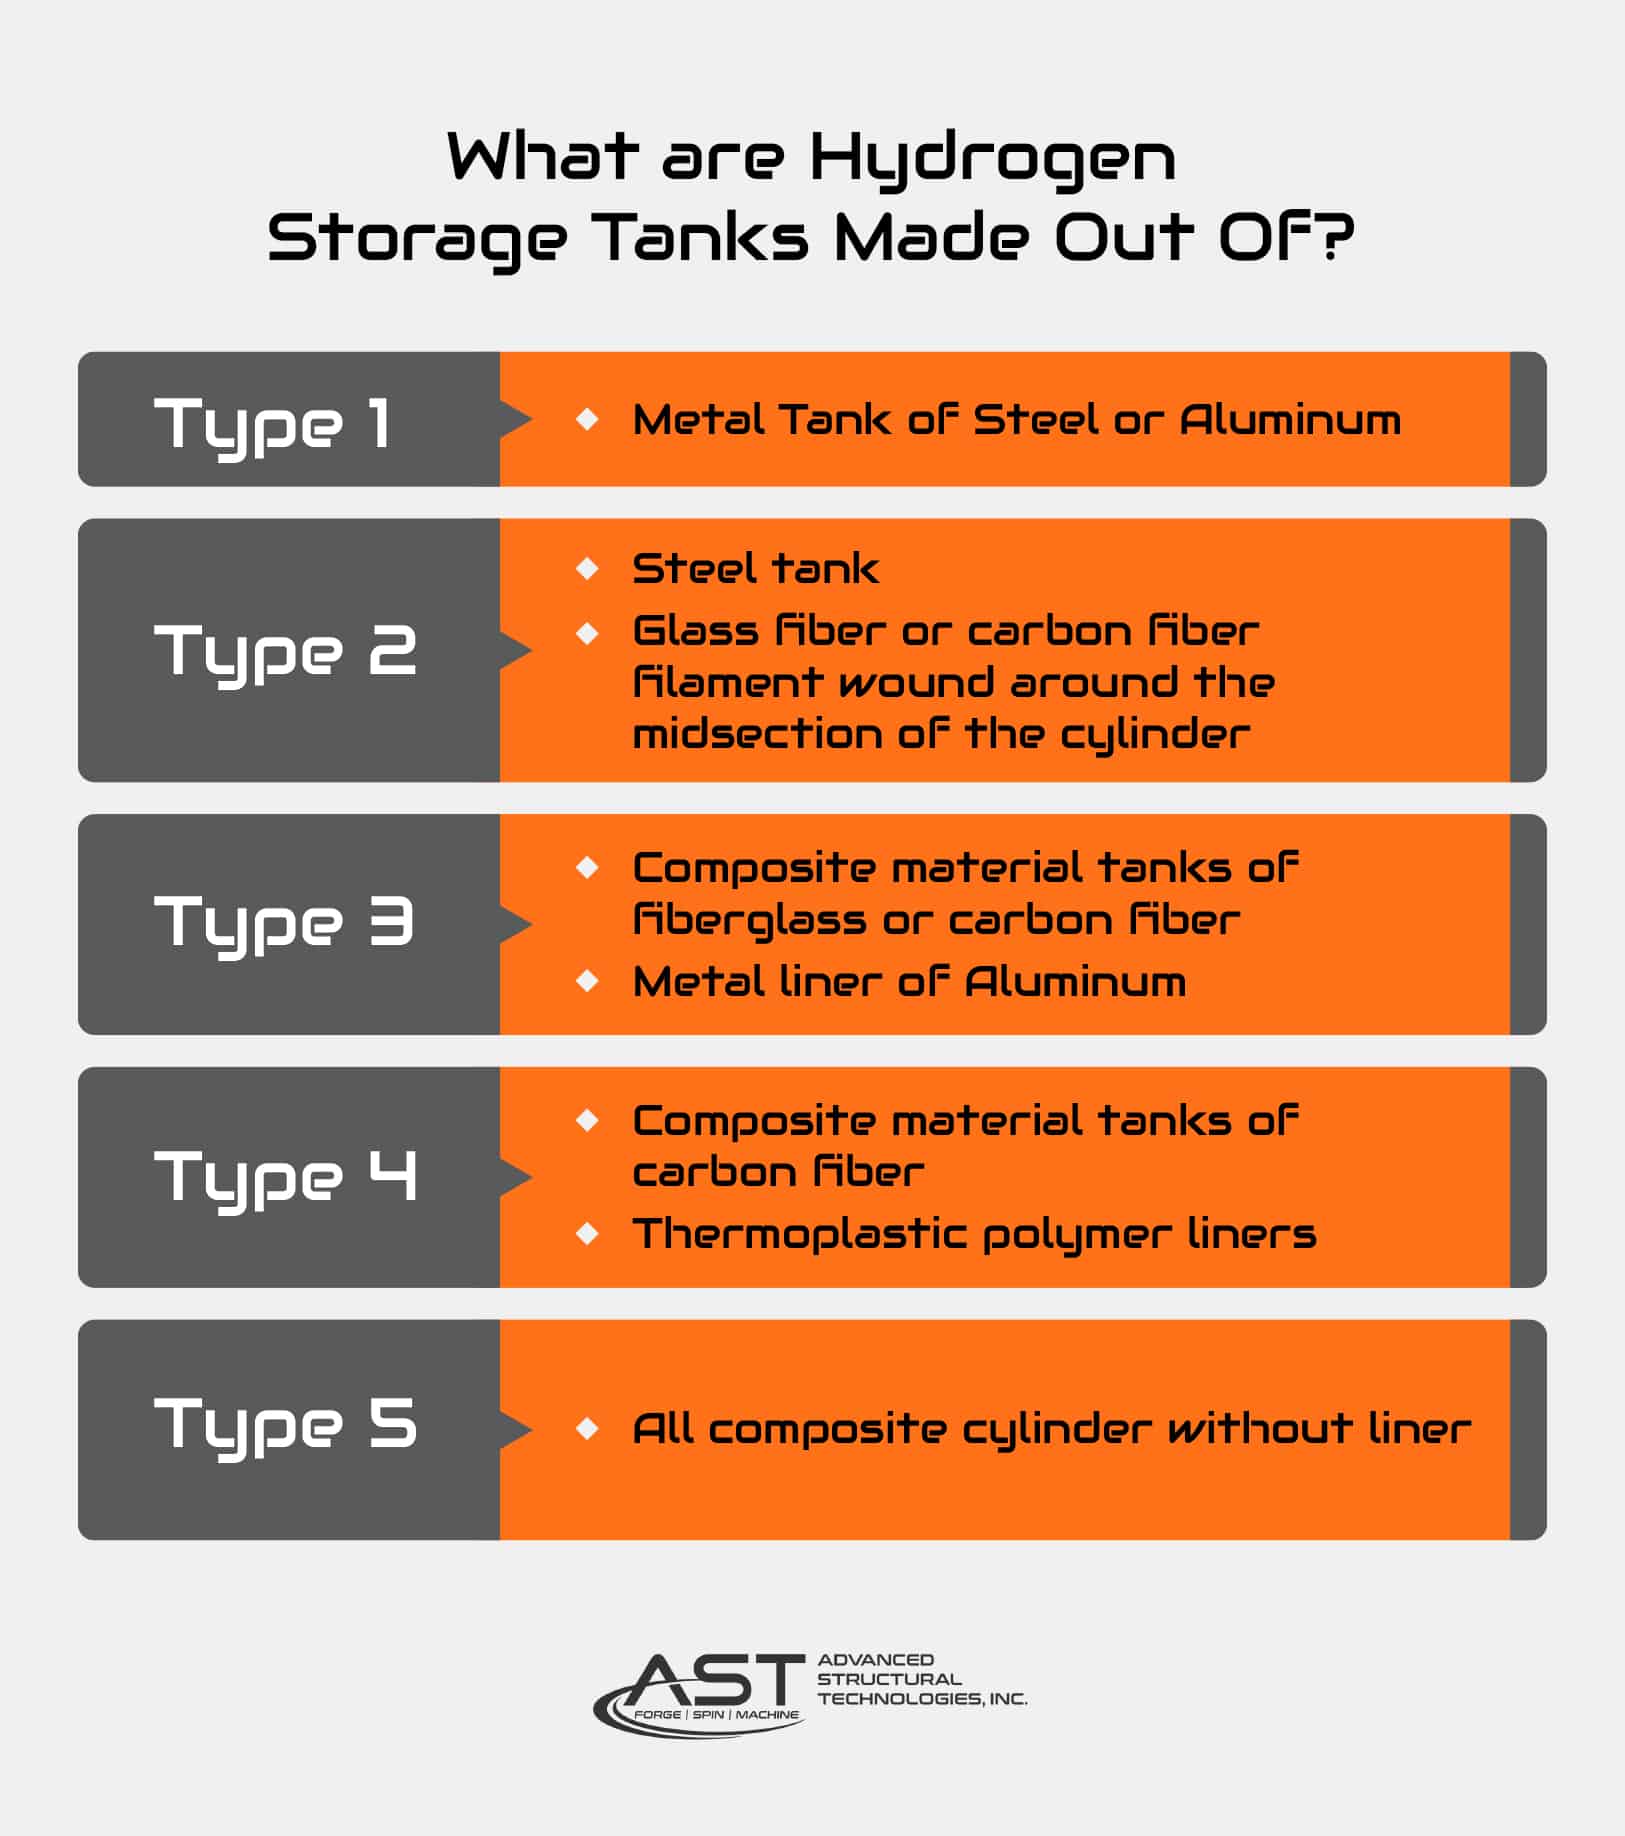 what are hydrogen storage tanks made out of?